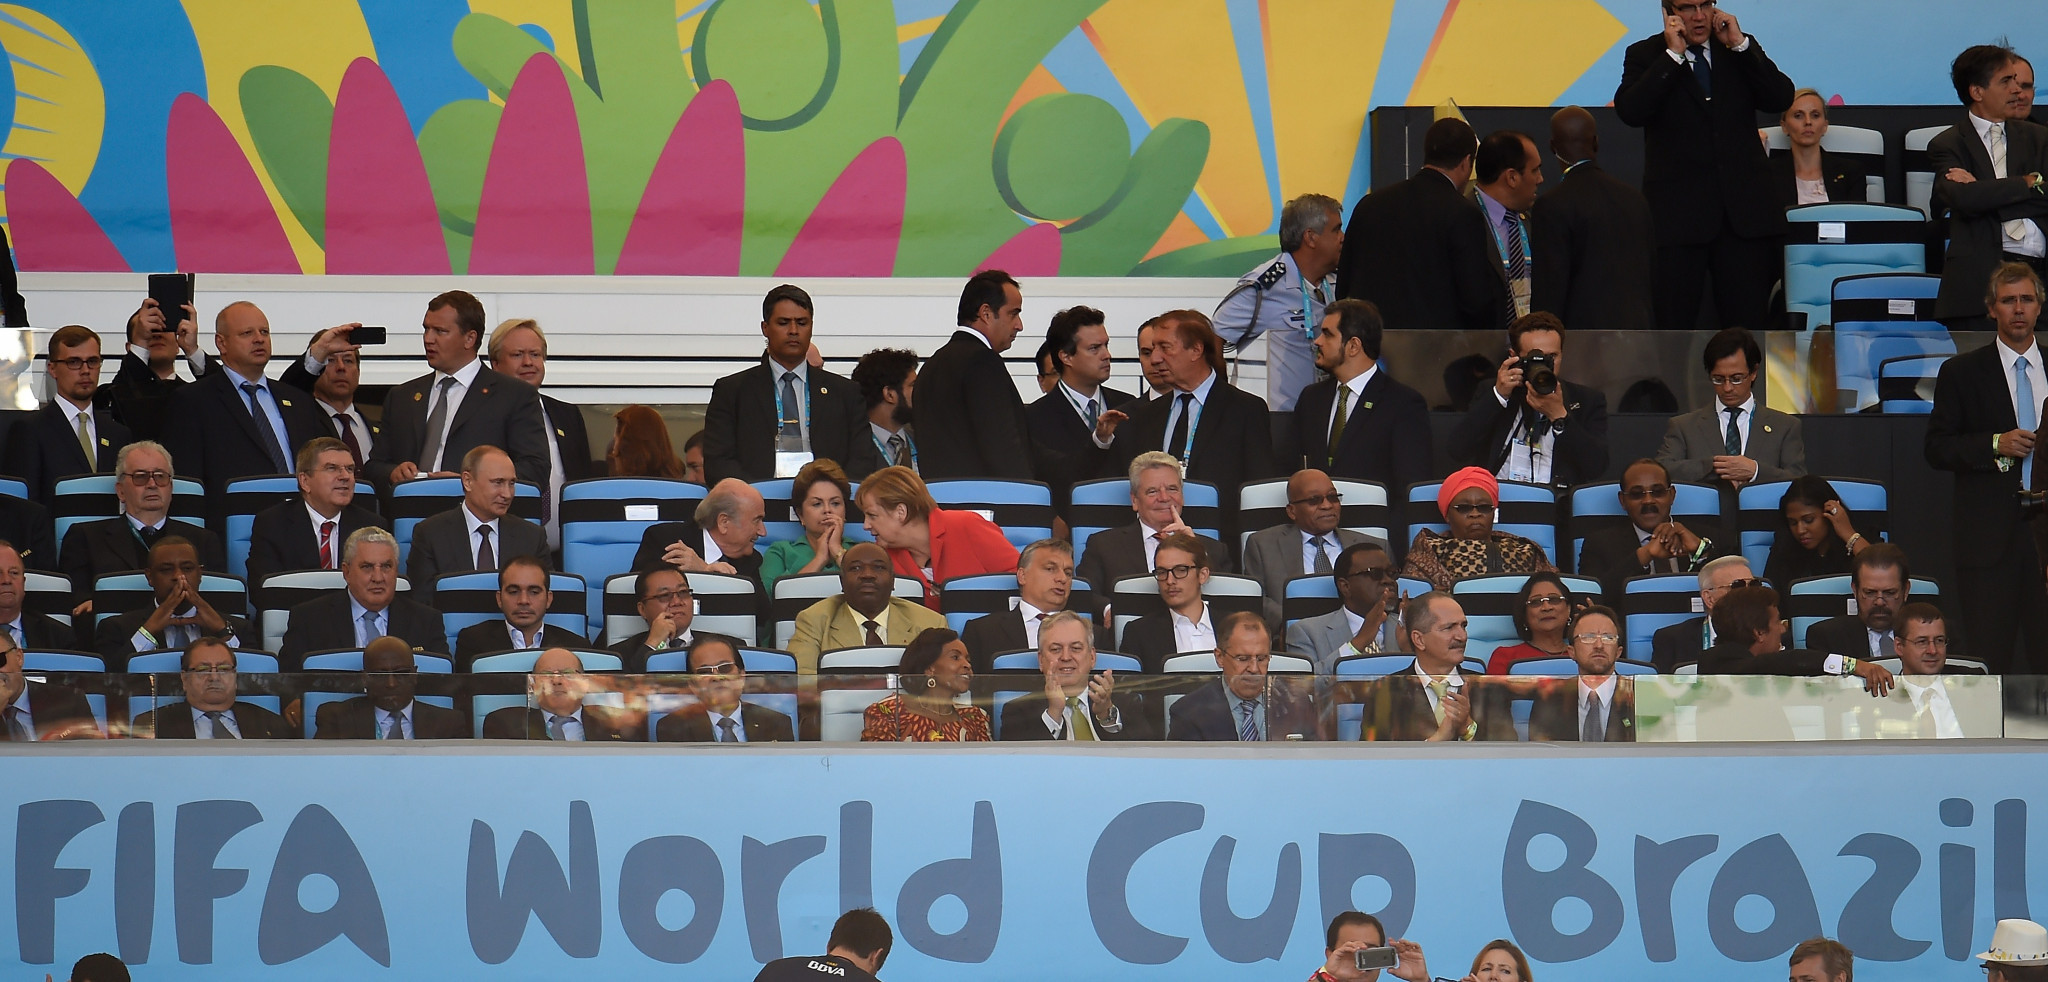 Thomas Bach, third row from top, second left, sat next to Vladimir Putin at the 2014 World Cup final in Brazil ©Getty Images